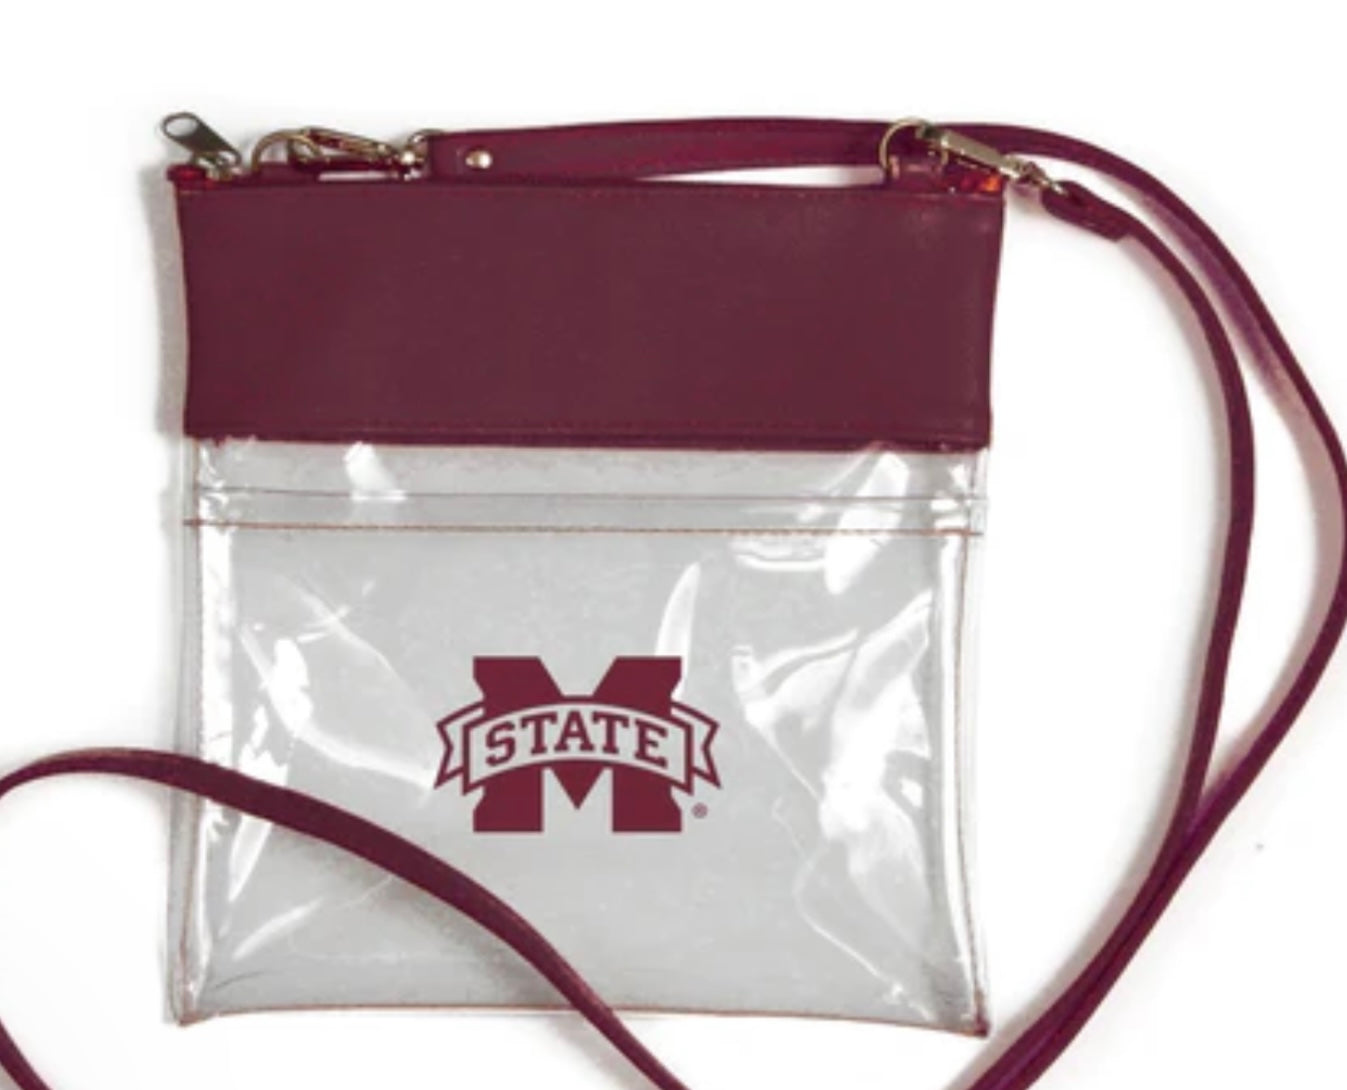 University Clear Purse with Reversible Patterned Shoulder Straps - multiple  options